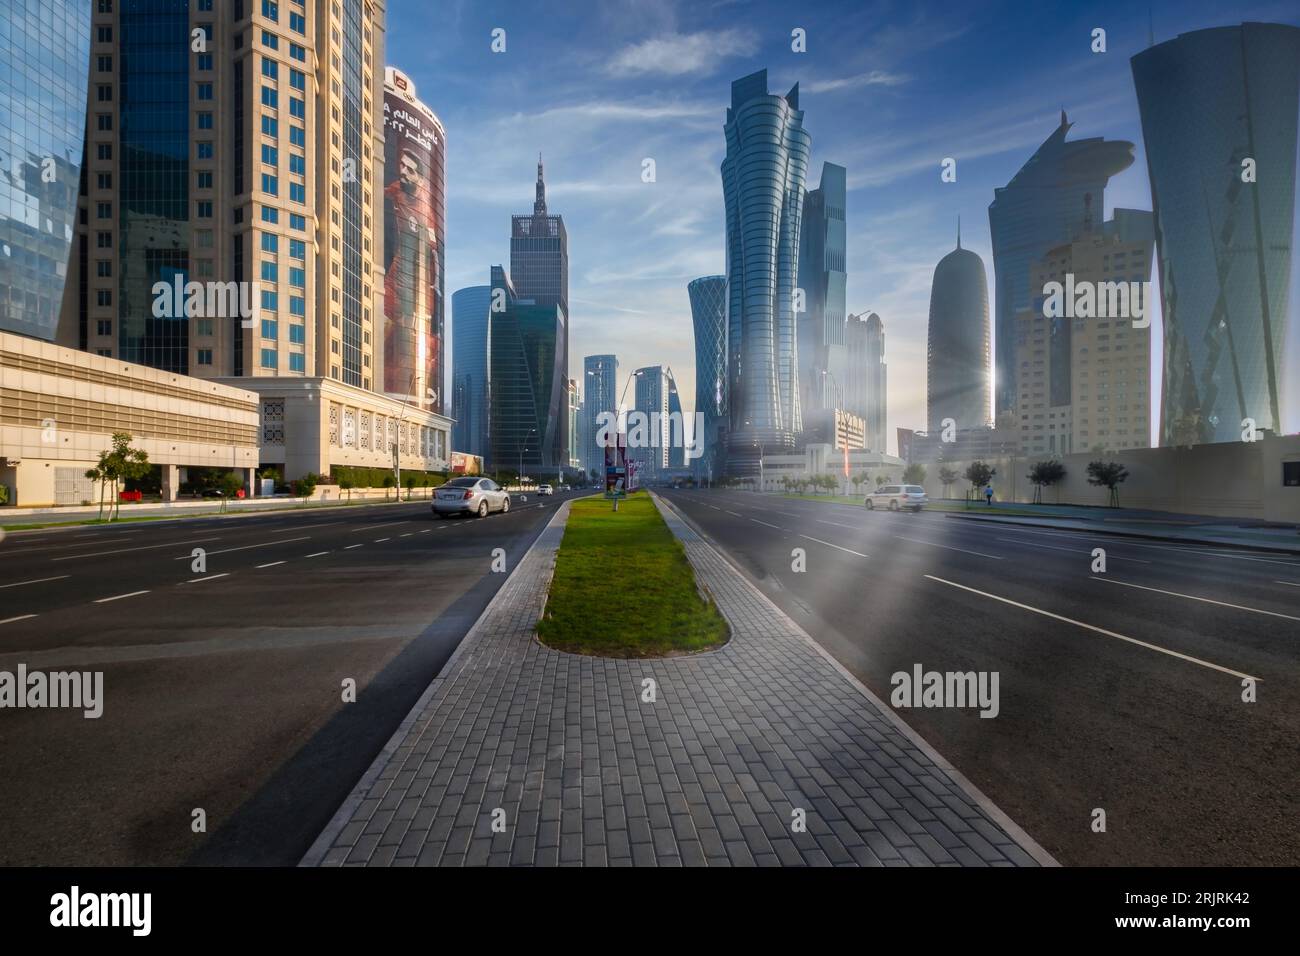 A picturesque photo captures the stunning Qatar Corniche road in all its glory during the FIFA World Cup. The winter afternoon sun casts an awesome sp Stock Photo